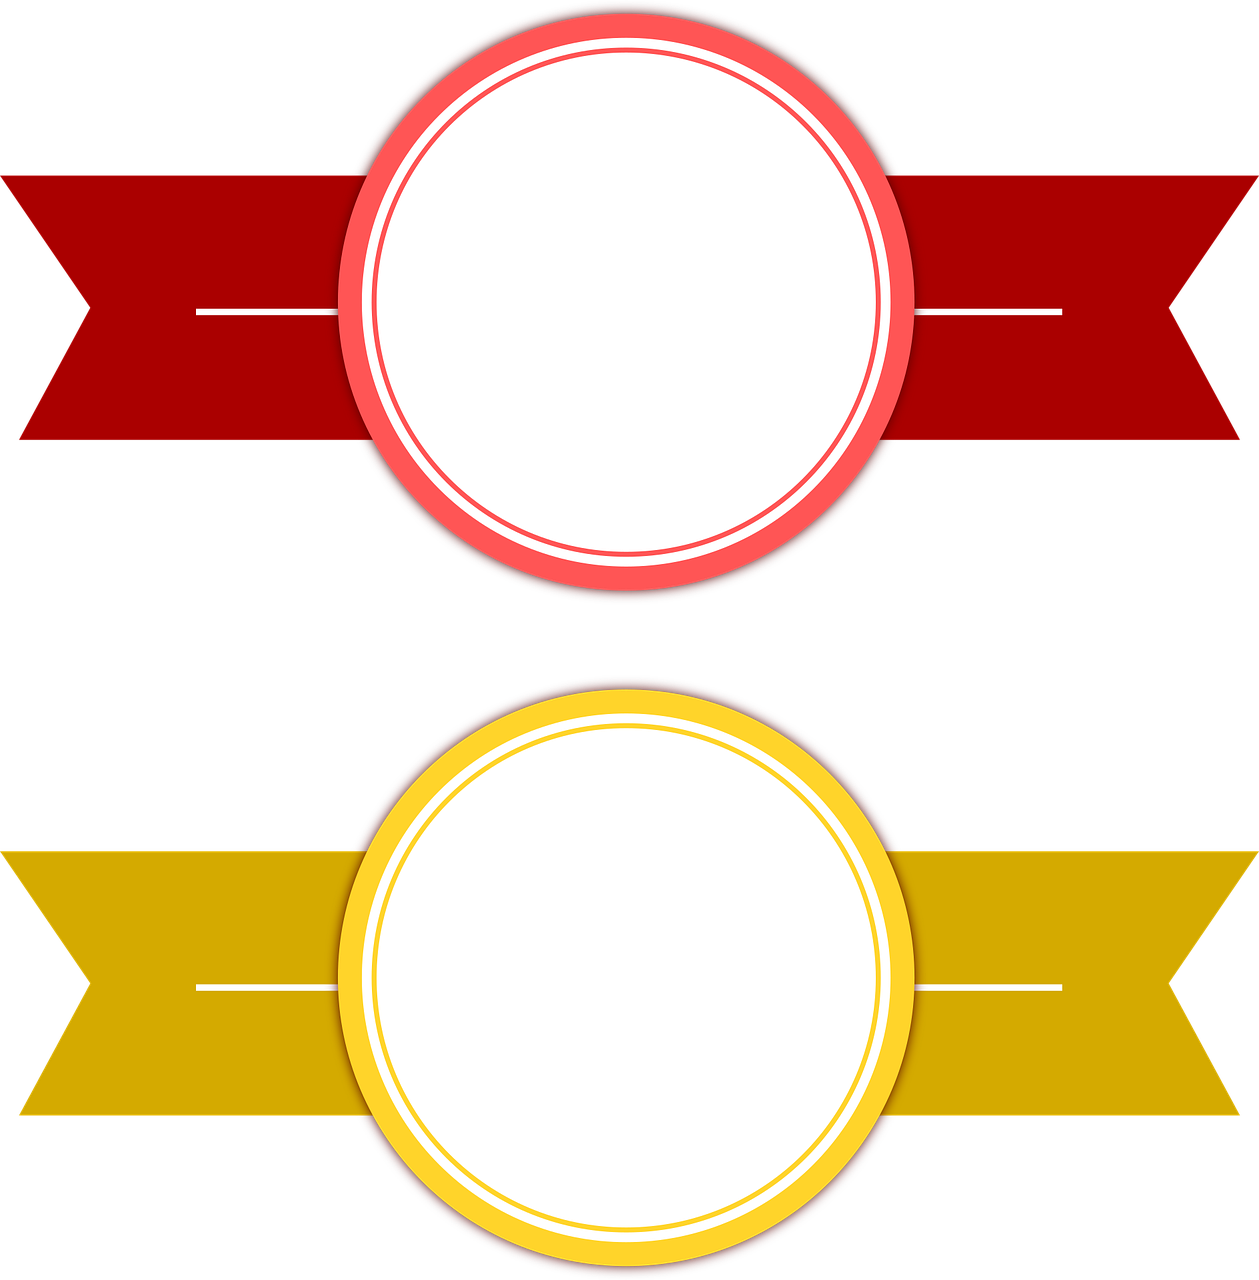 a couple of red and yellow banners on a black background, a screenshot, digital art, medal, transparent background, red brown and white color scheme, round-cropped